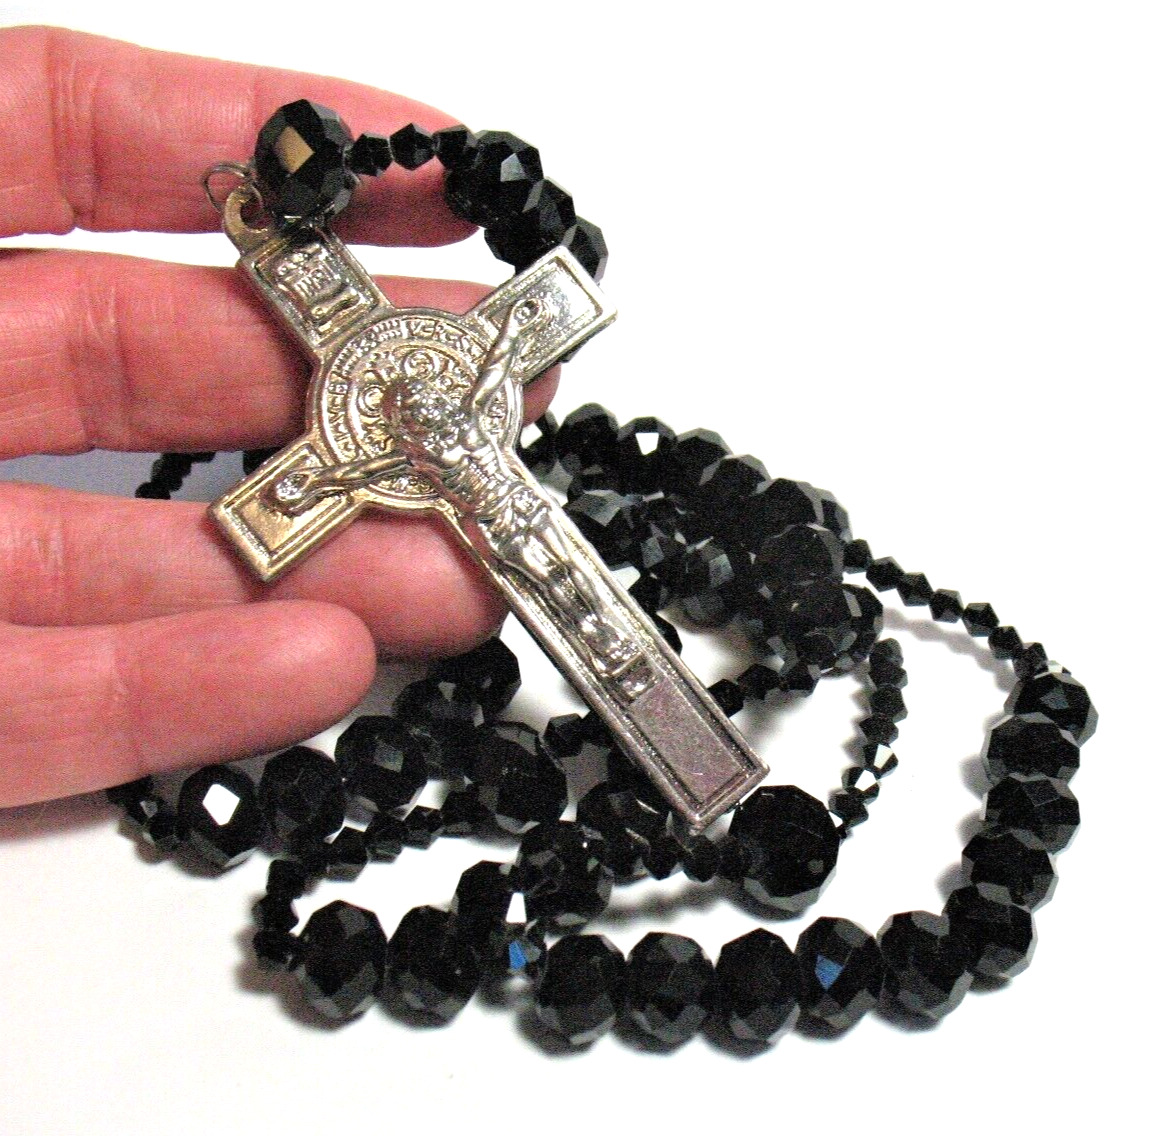 SILVER FACETED GLASS BEAD ROSARY 24 INCHES LONG